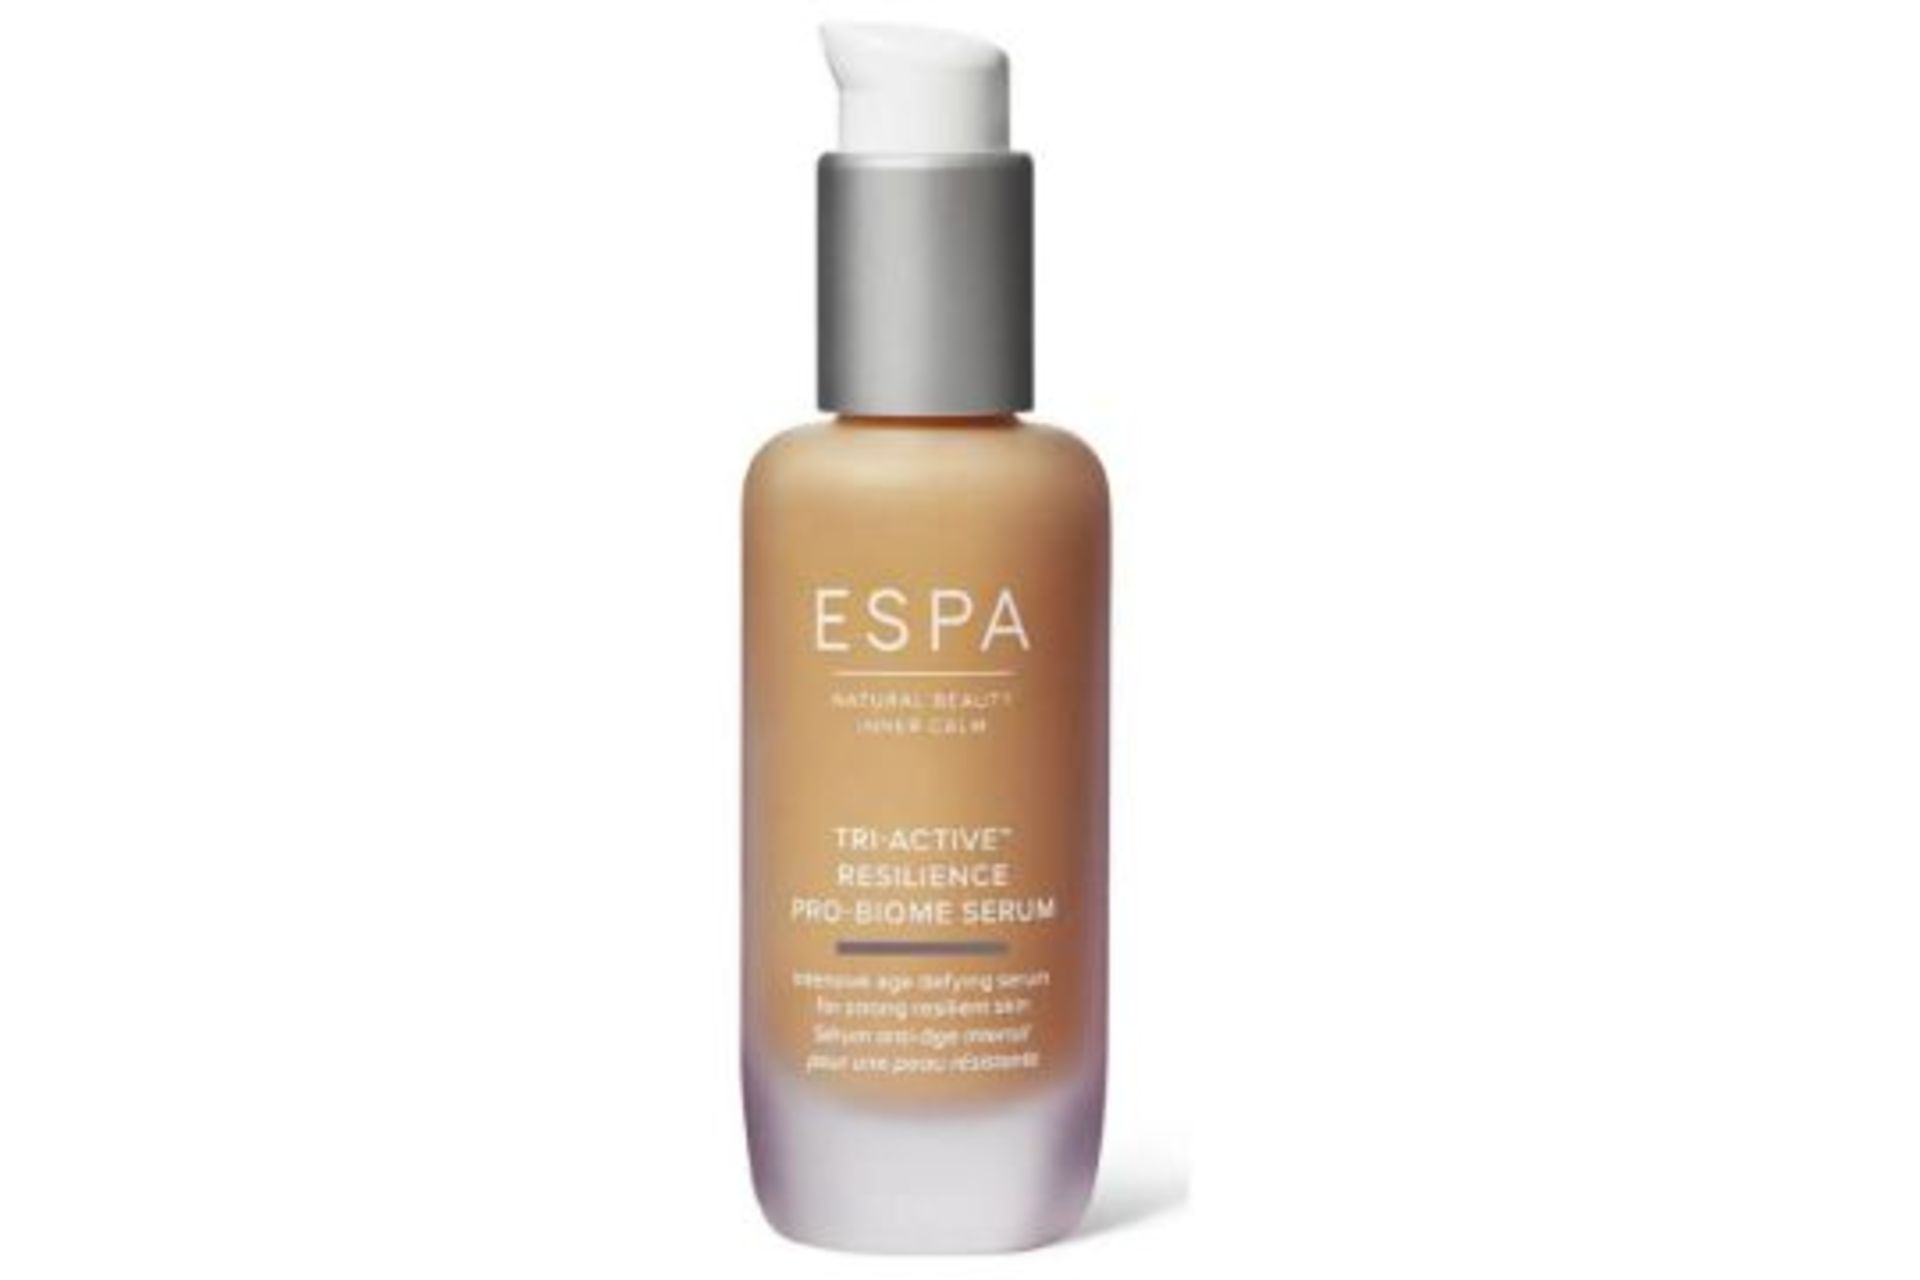 TRADE LOT TO CONTAIN 75x NEW ESPA Tri-Active Resilience Pro-Biome Serum 10ml. RRP £20 Each. (R12-